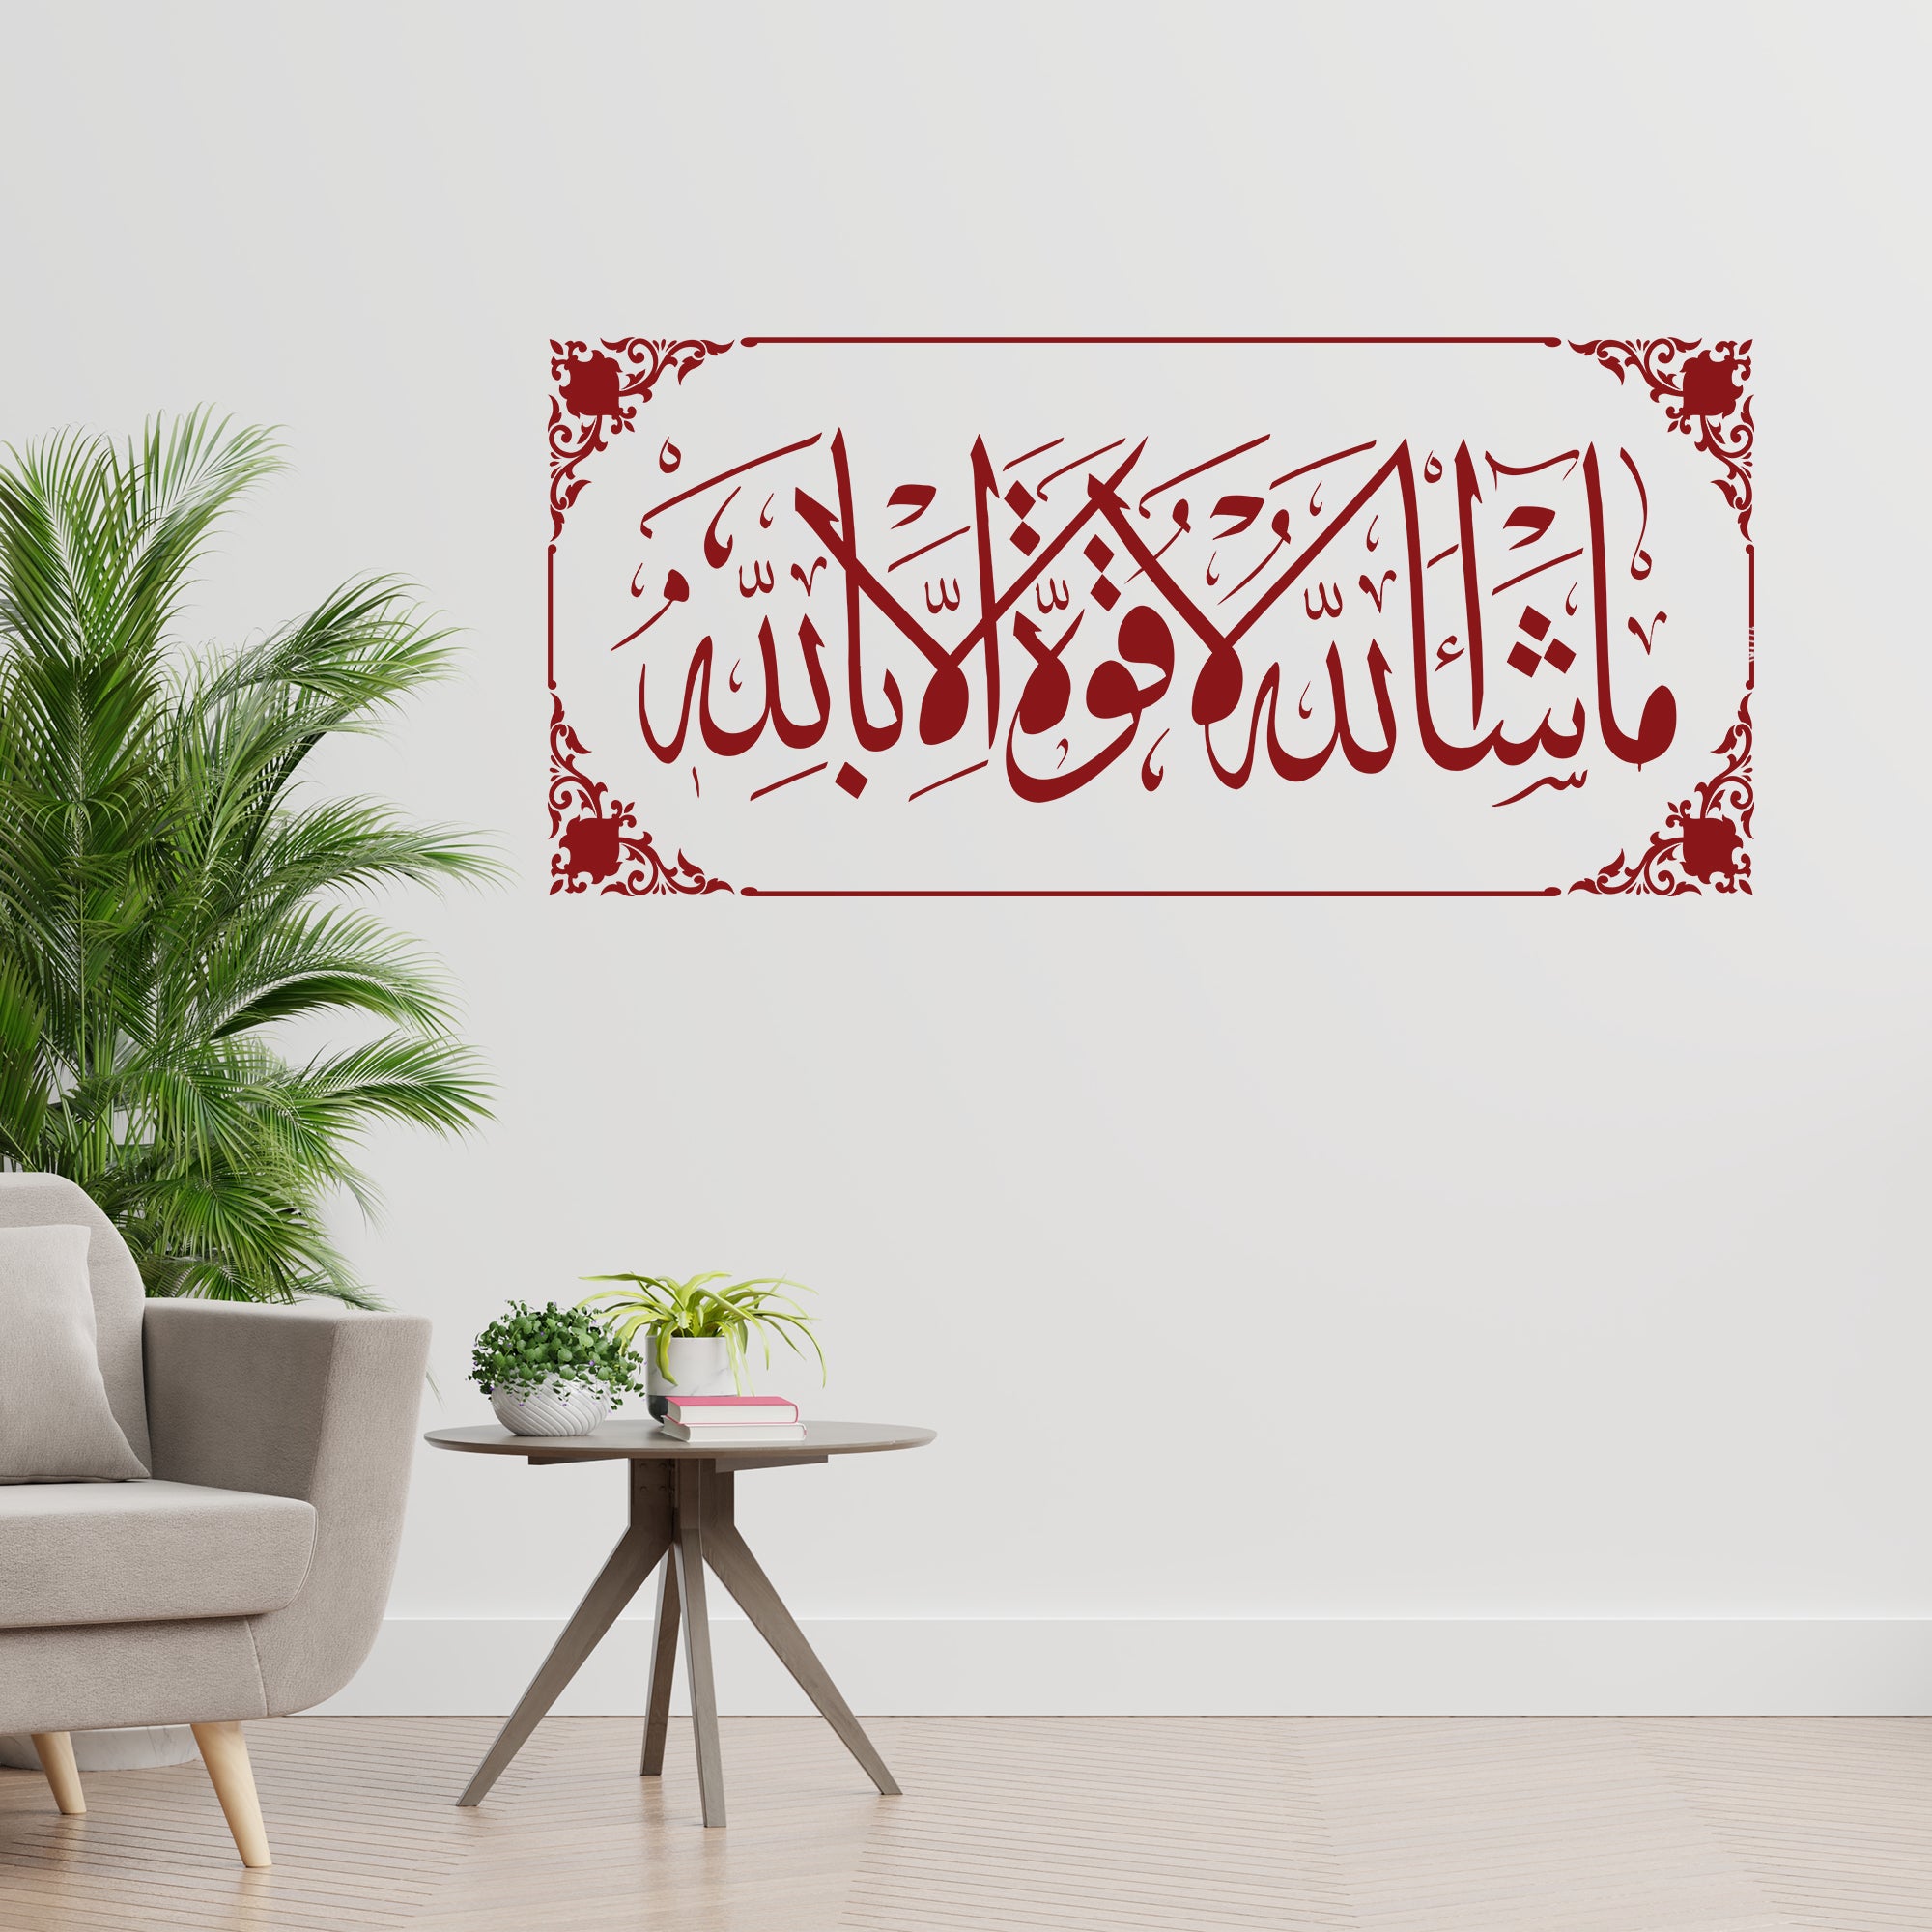 Arabic Calligraphy High Quality Religious Wall Sticker